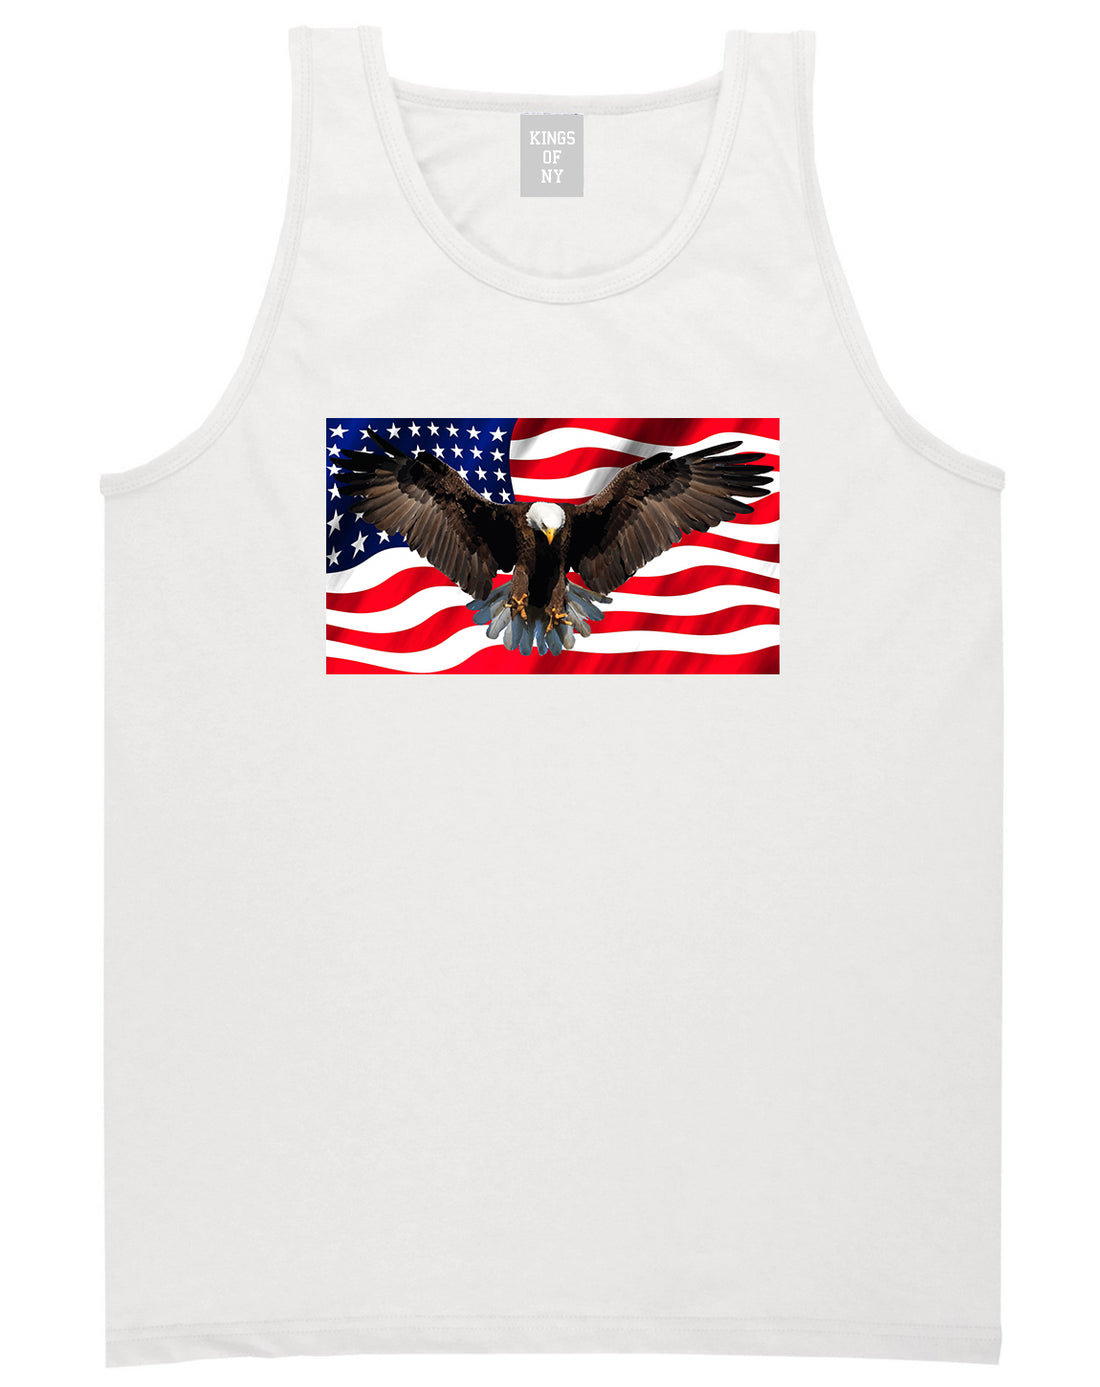 Bald Eagle American Flag White Tank Top Shirt by Kings Of NY